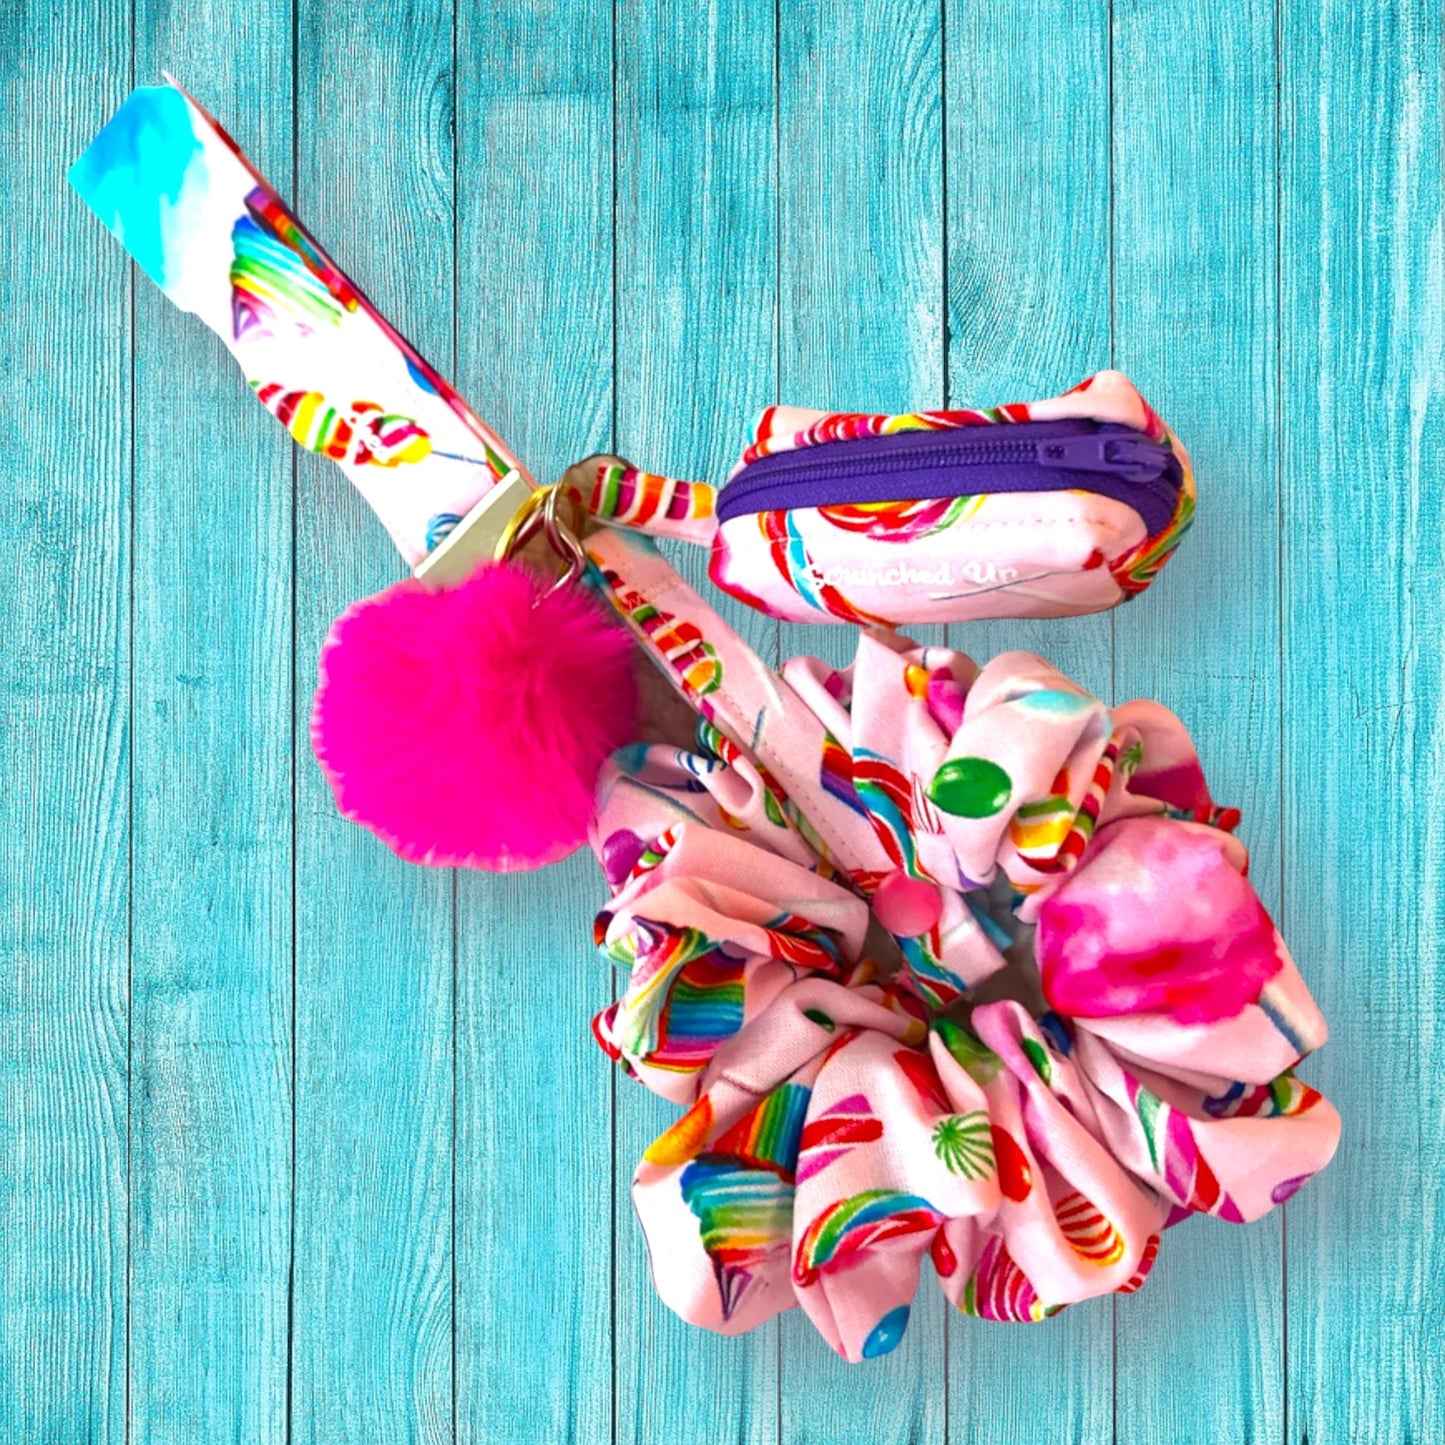 Candy land keychain with detachable scrunchie